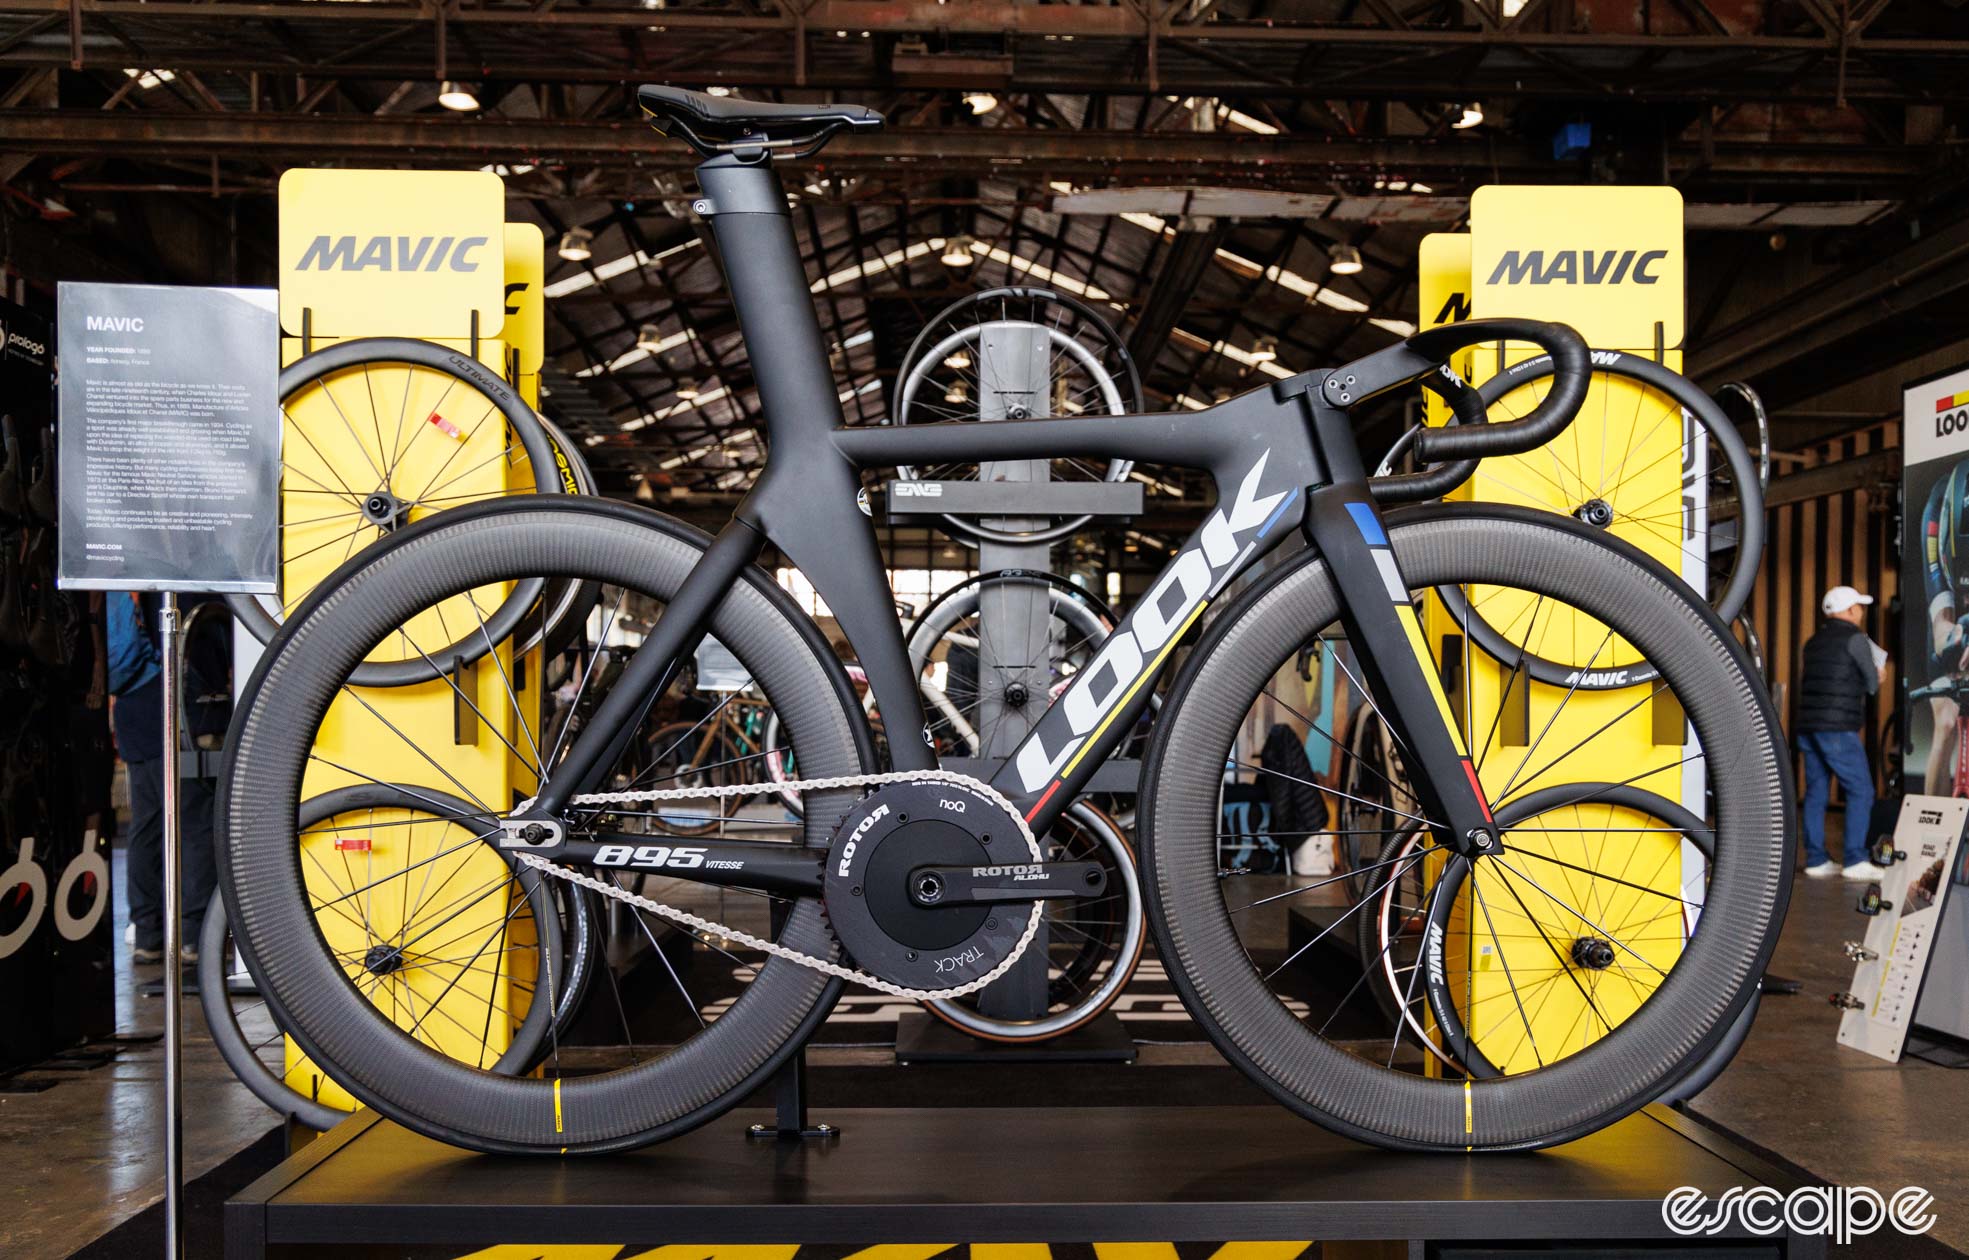 Look 895 Vitesse track bike photographed with Mavic wheels in the background. 